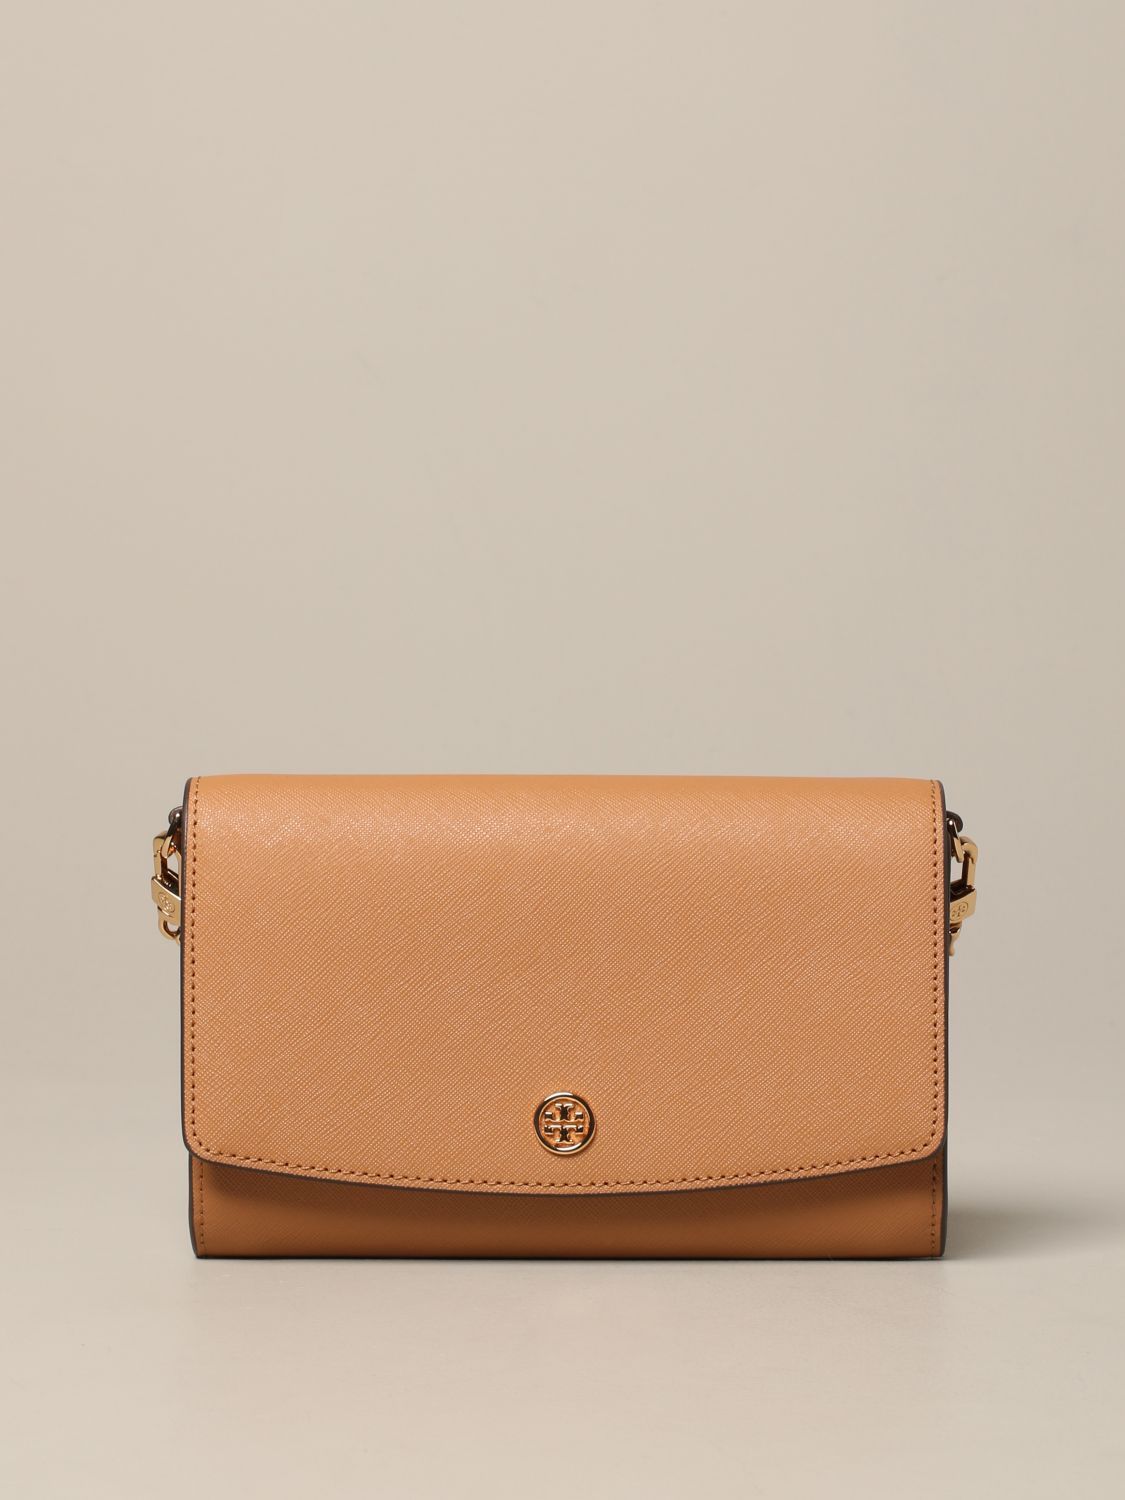 Tory Burch Outlet: Robinson chain wallet shoulder bag - Camel | Tory Burch  mini bag 54277 online on 